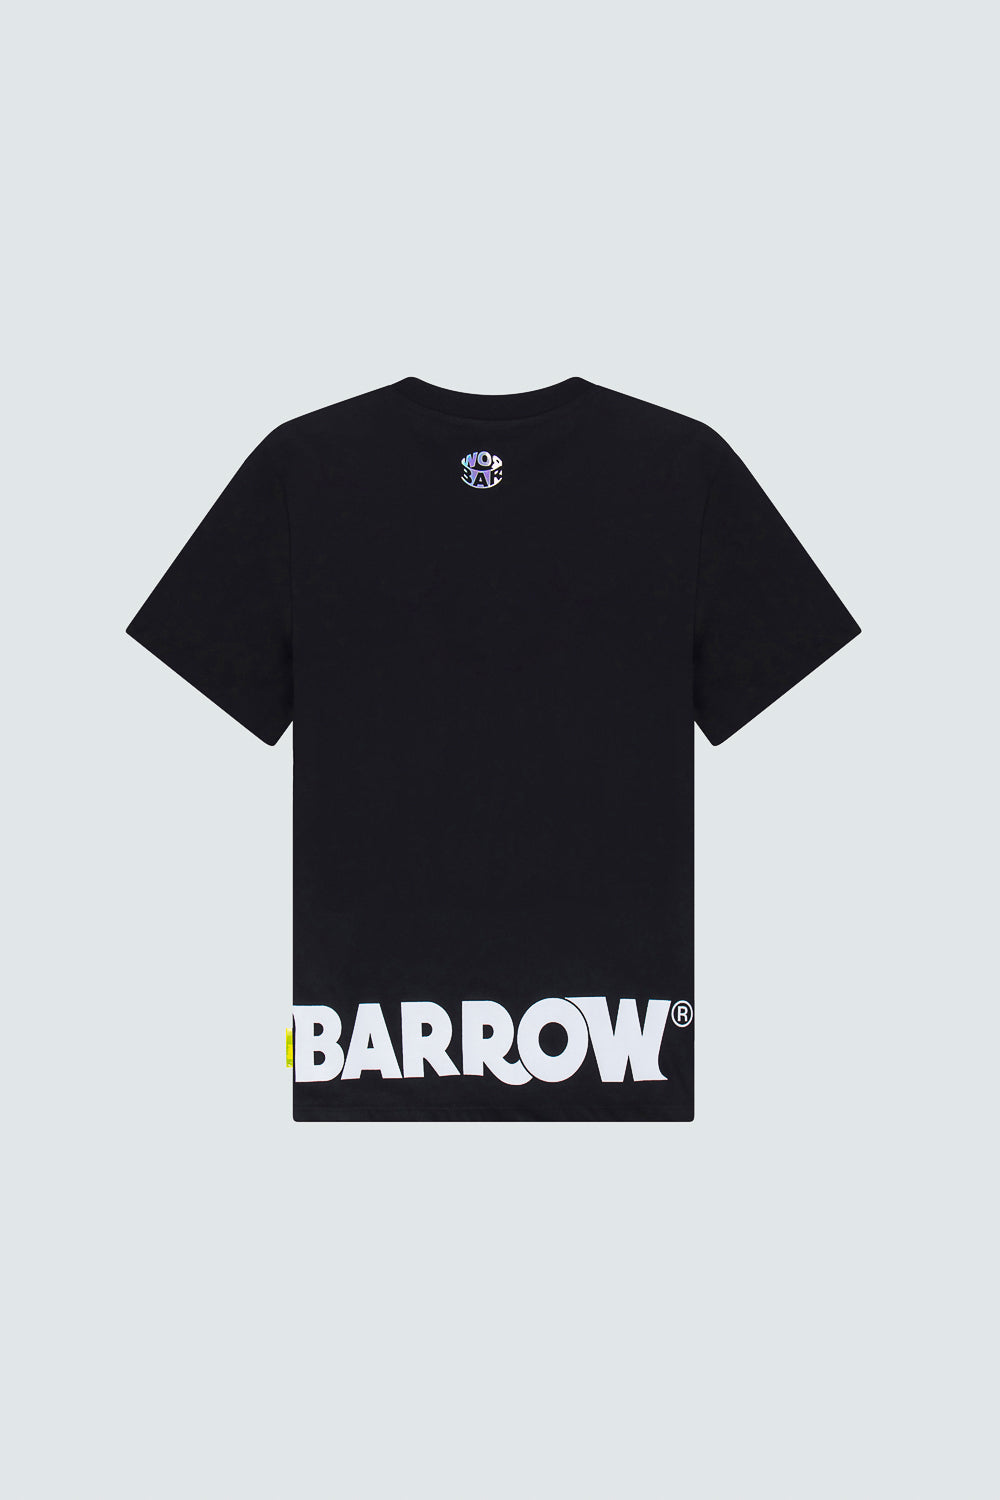 Buy the Barrow Smiley Logo T-Shirt in Black at Intro. Spend £50 for free UK delivery. Official stockists. We ship worldwide.